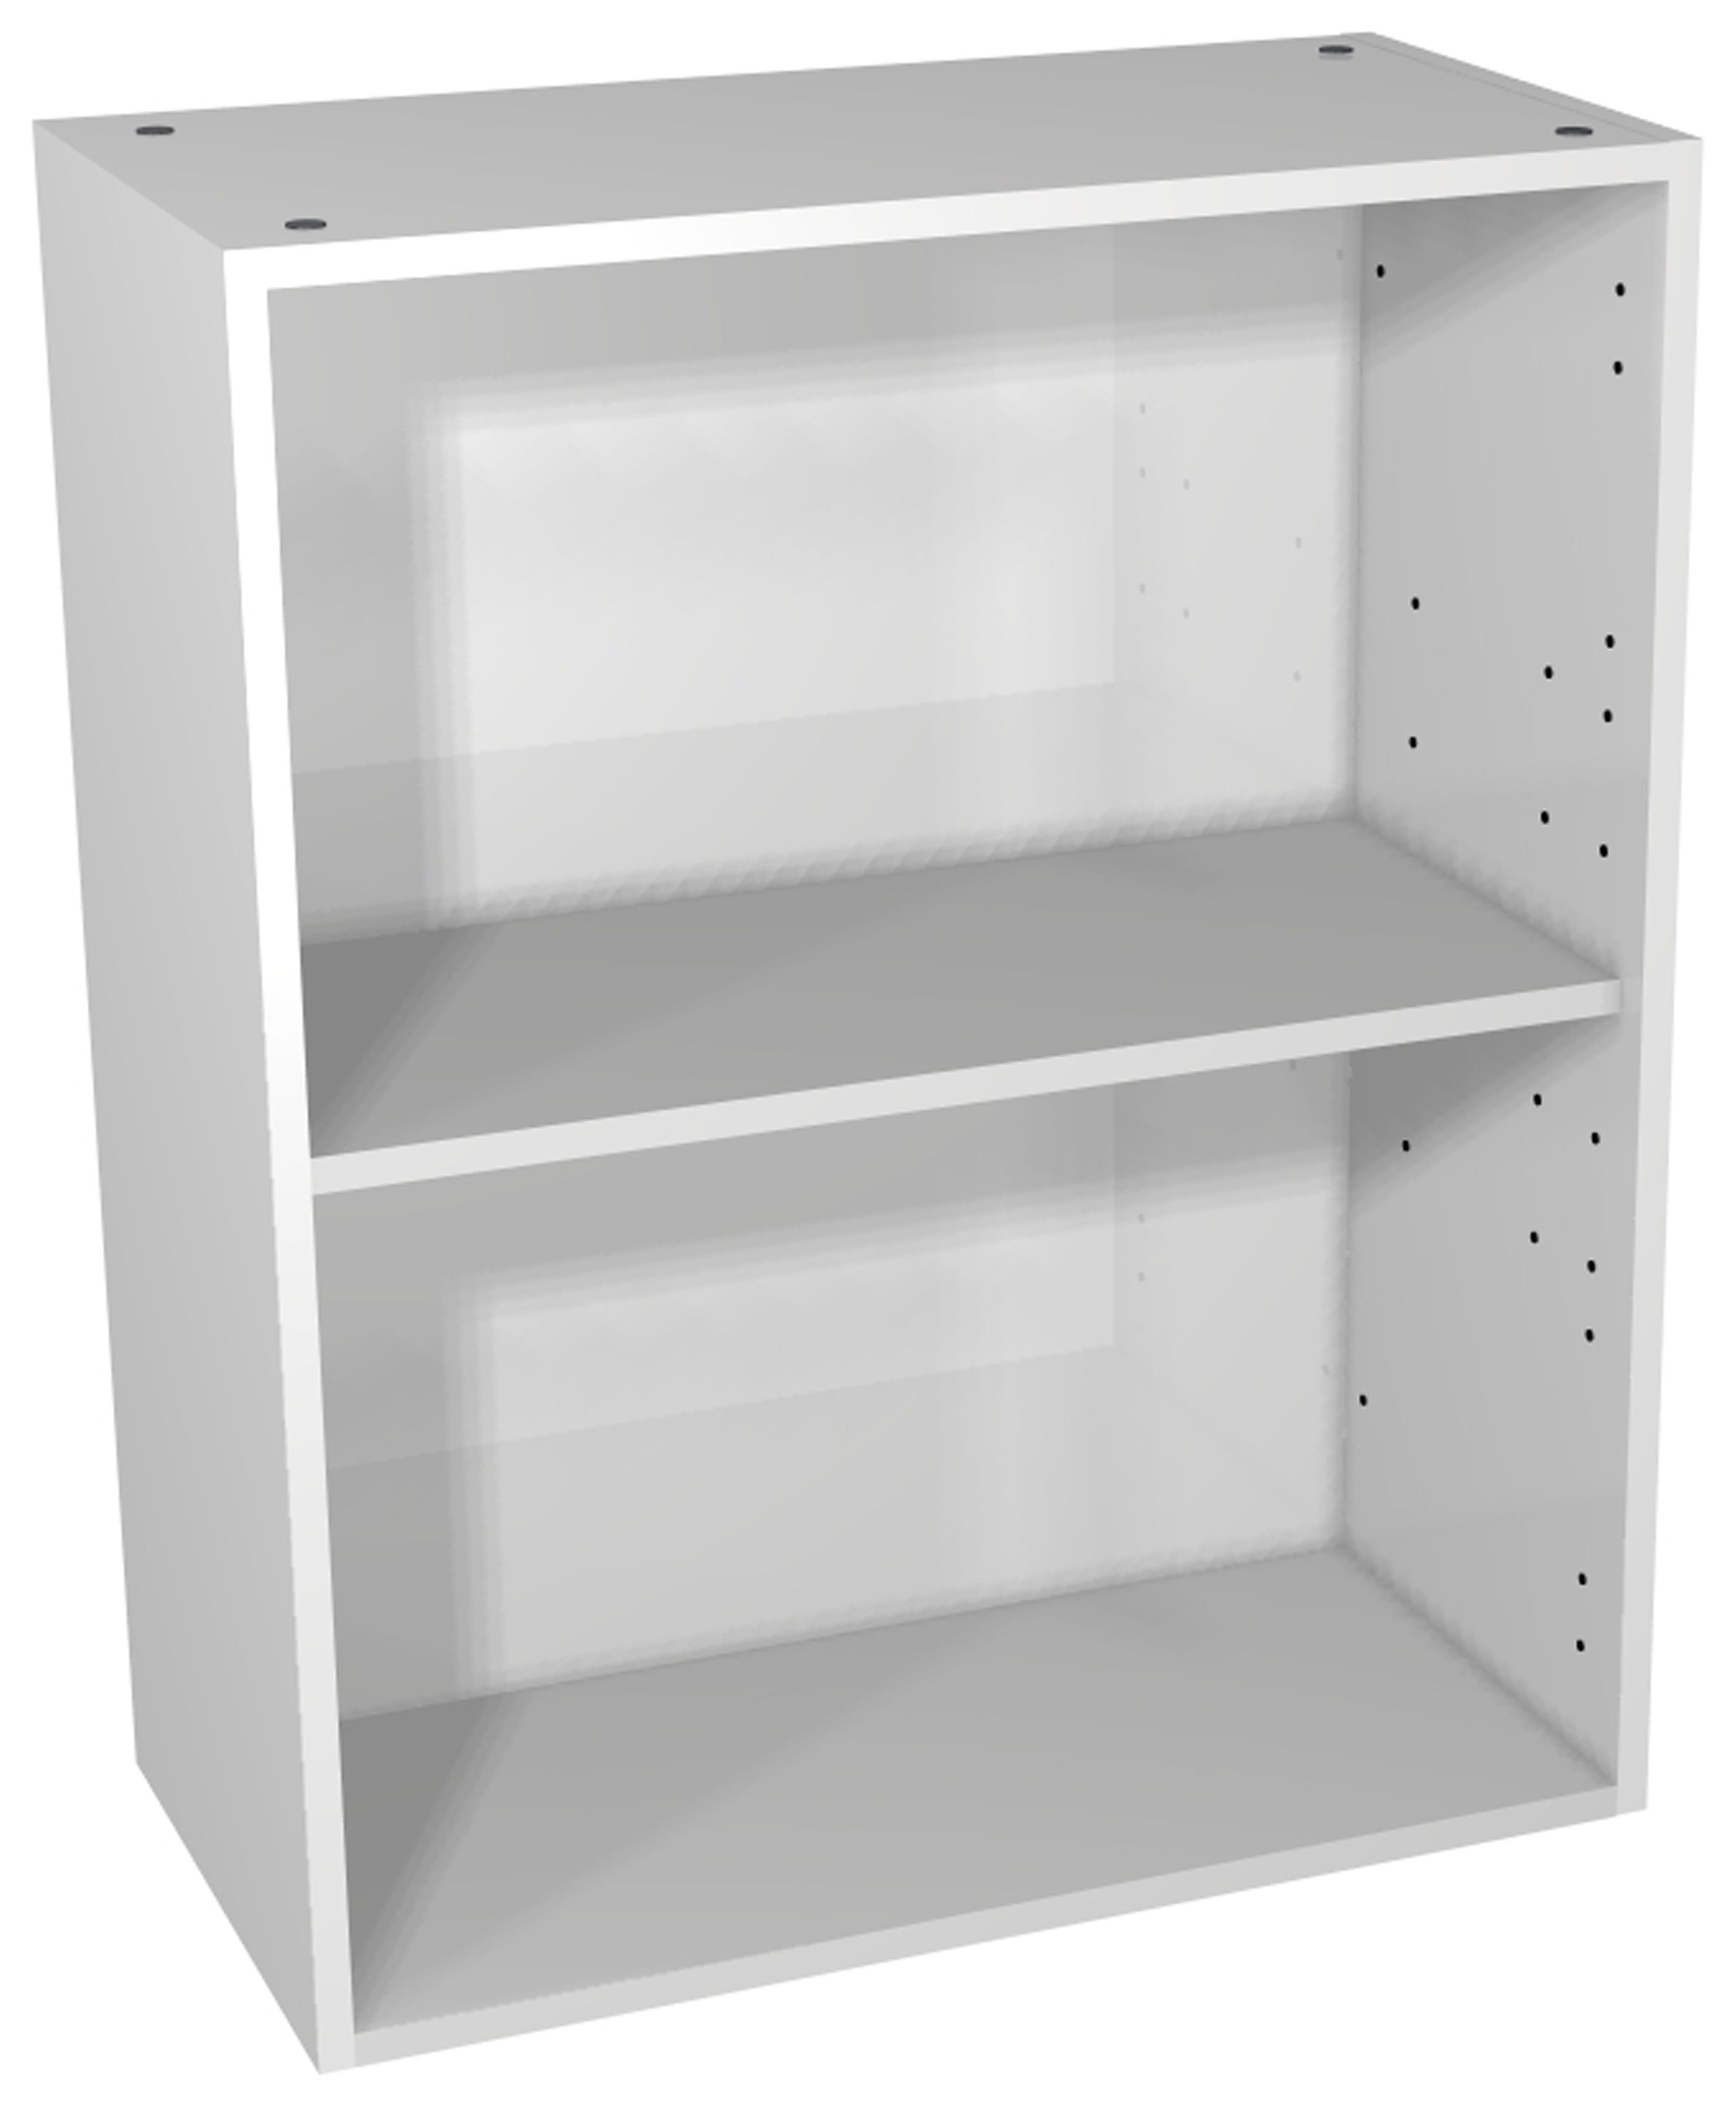 Image of Wickes Hertford Dove Grey Open Display Unit - 600 x 735mm